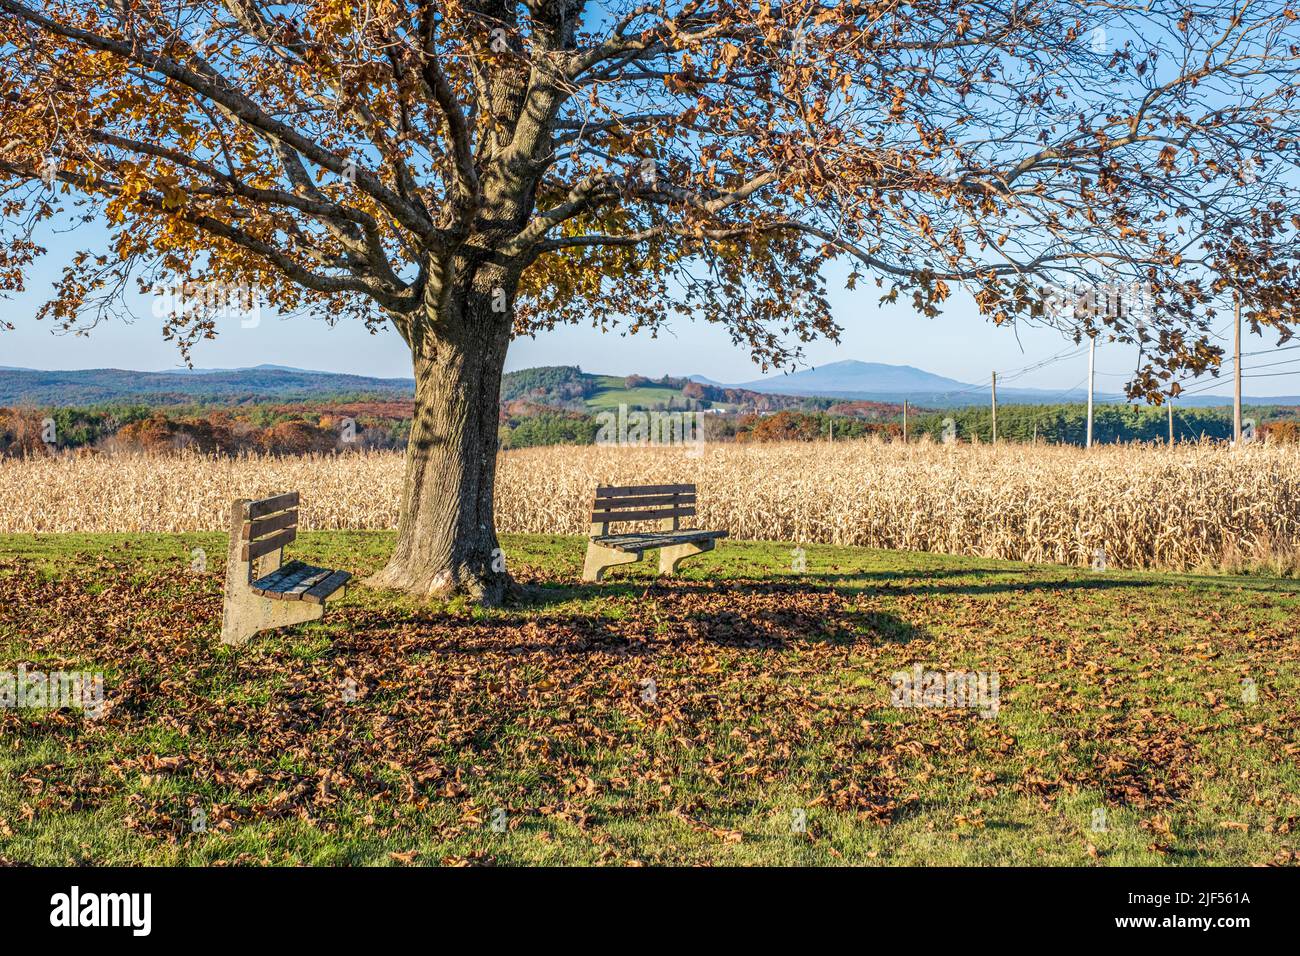 Crimson King Maple Tree in a field with benches in Templeton, Massachusetts Stock Photo